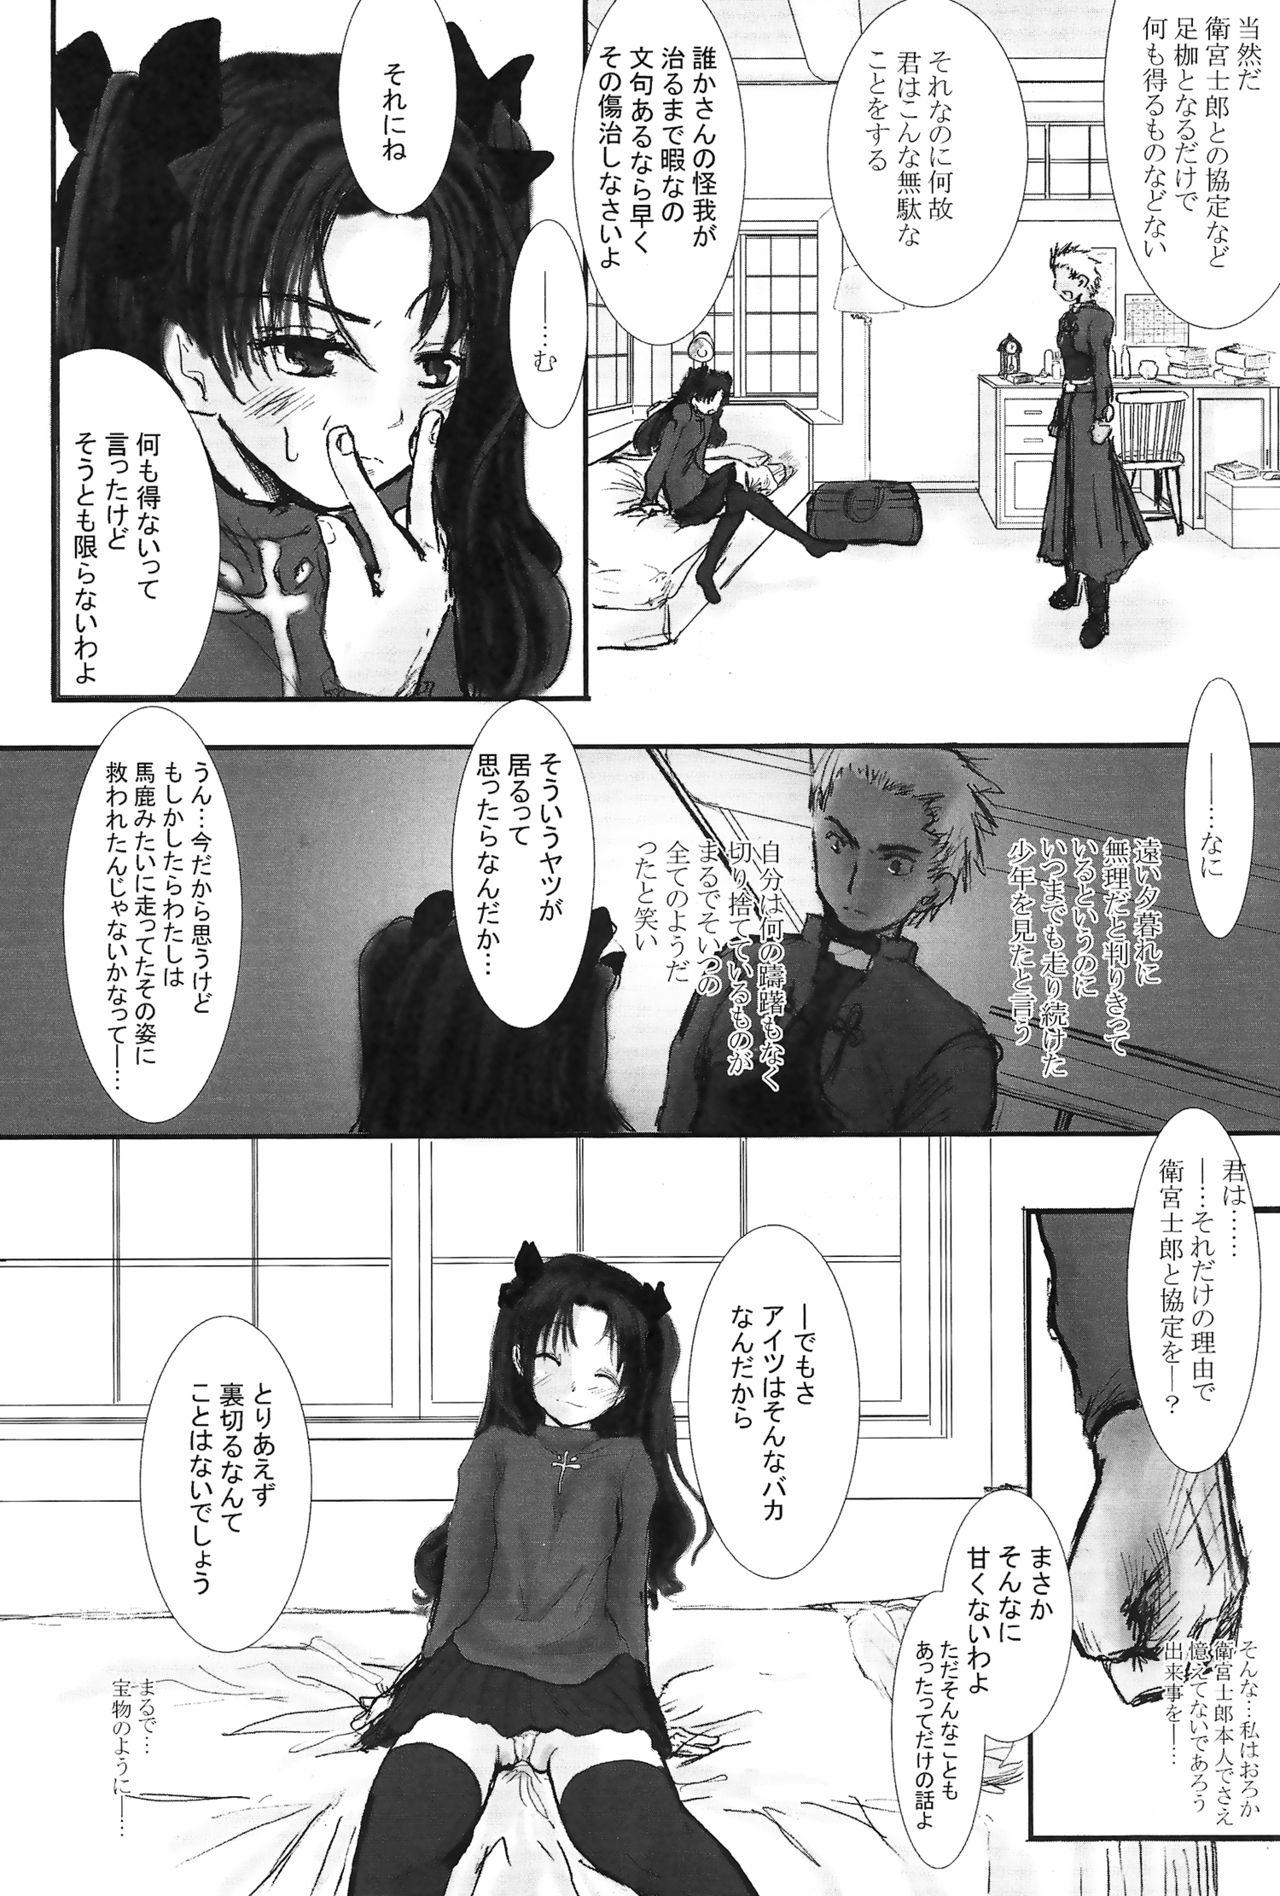 Bro Another/Answer - Fate stay night Cartoon - Page 9